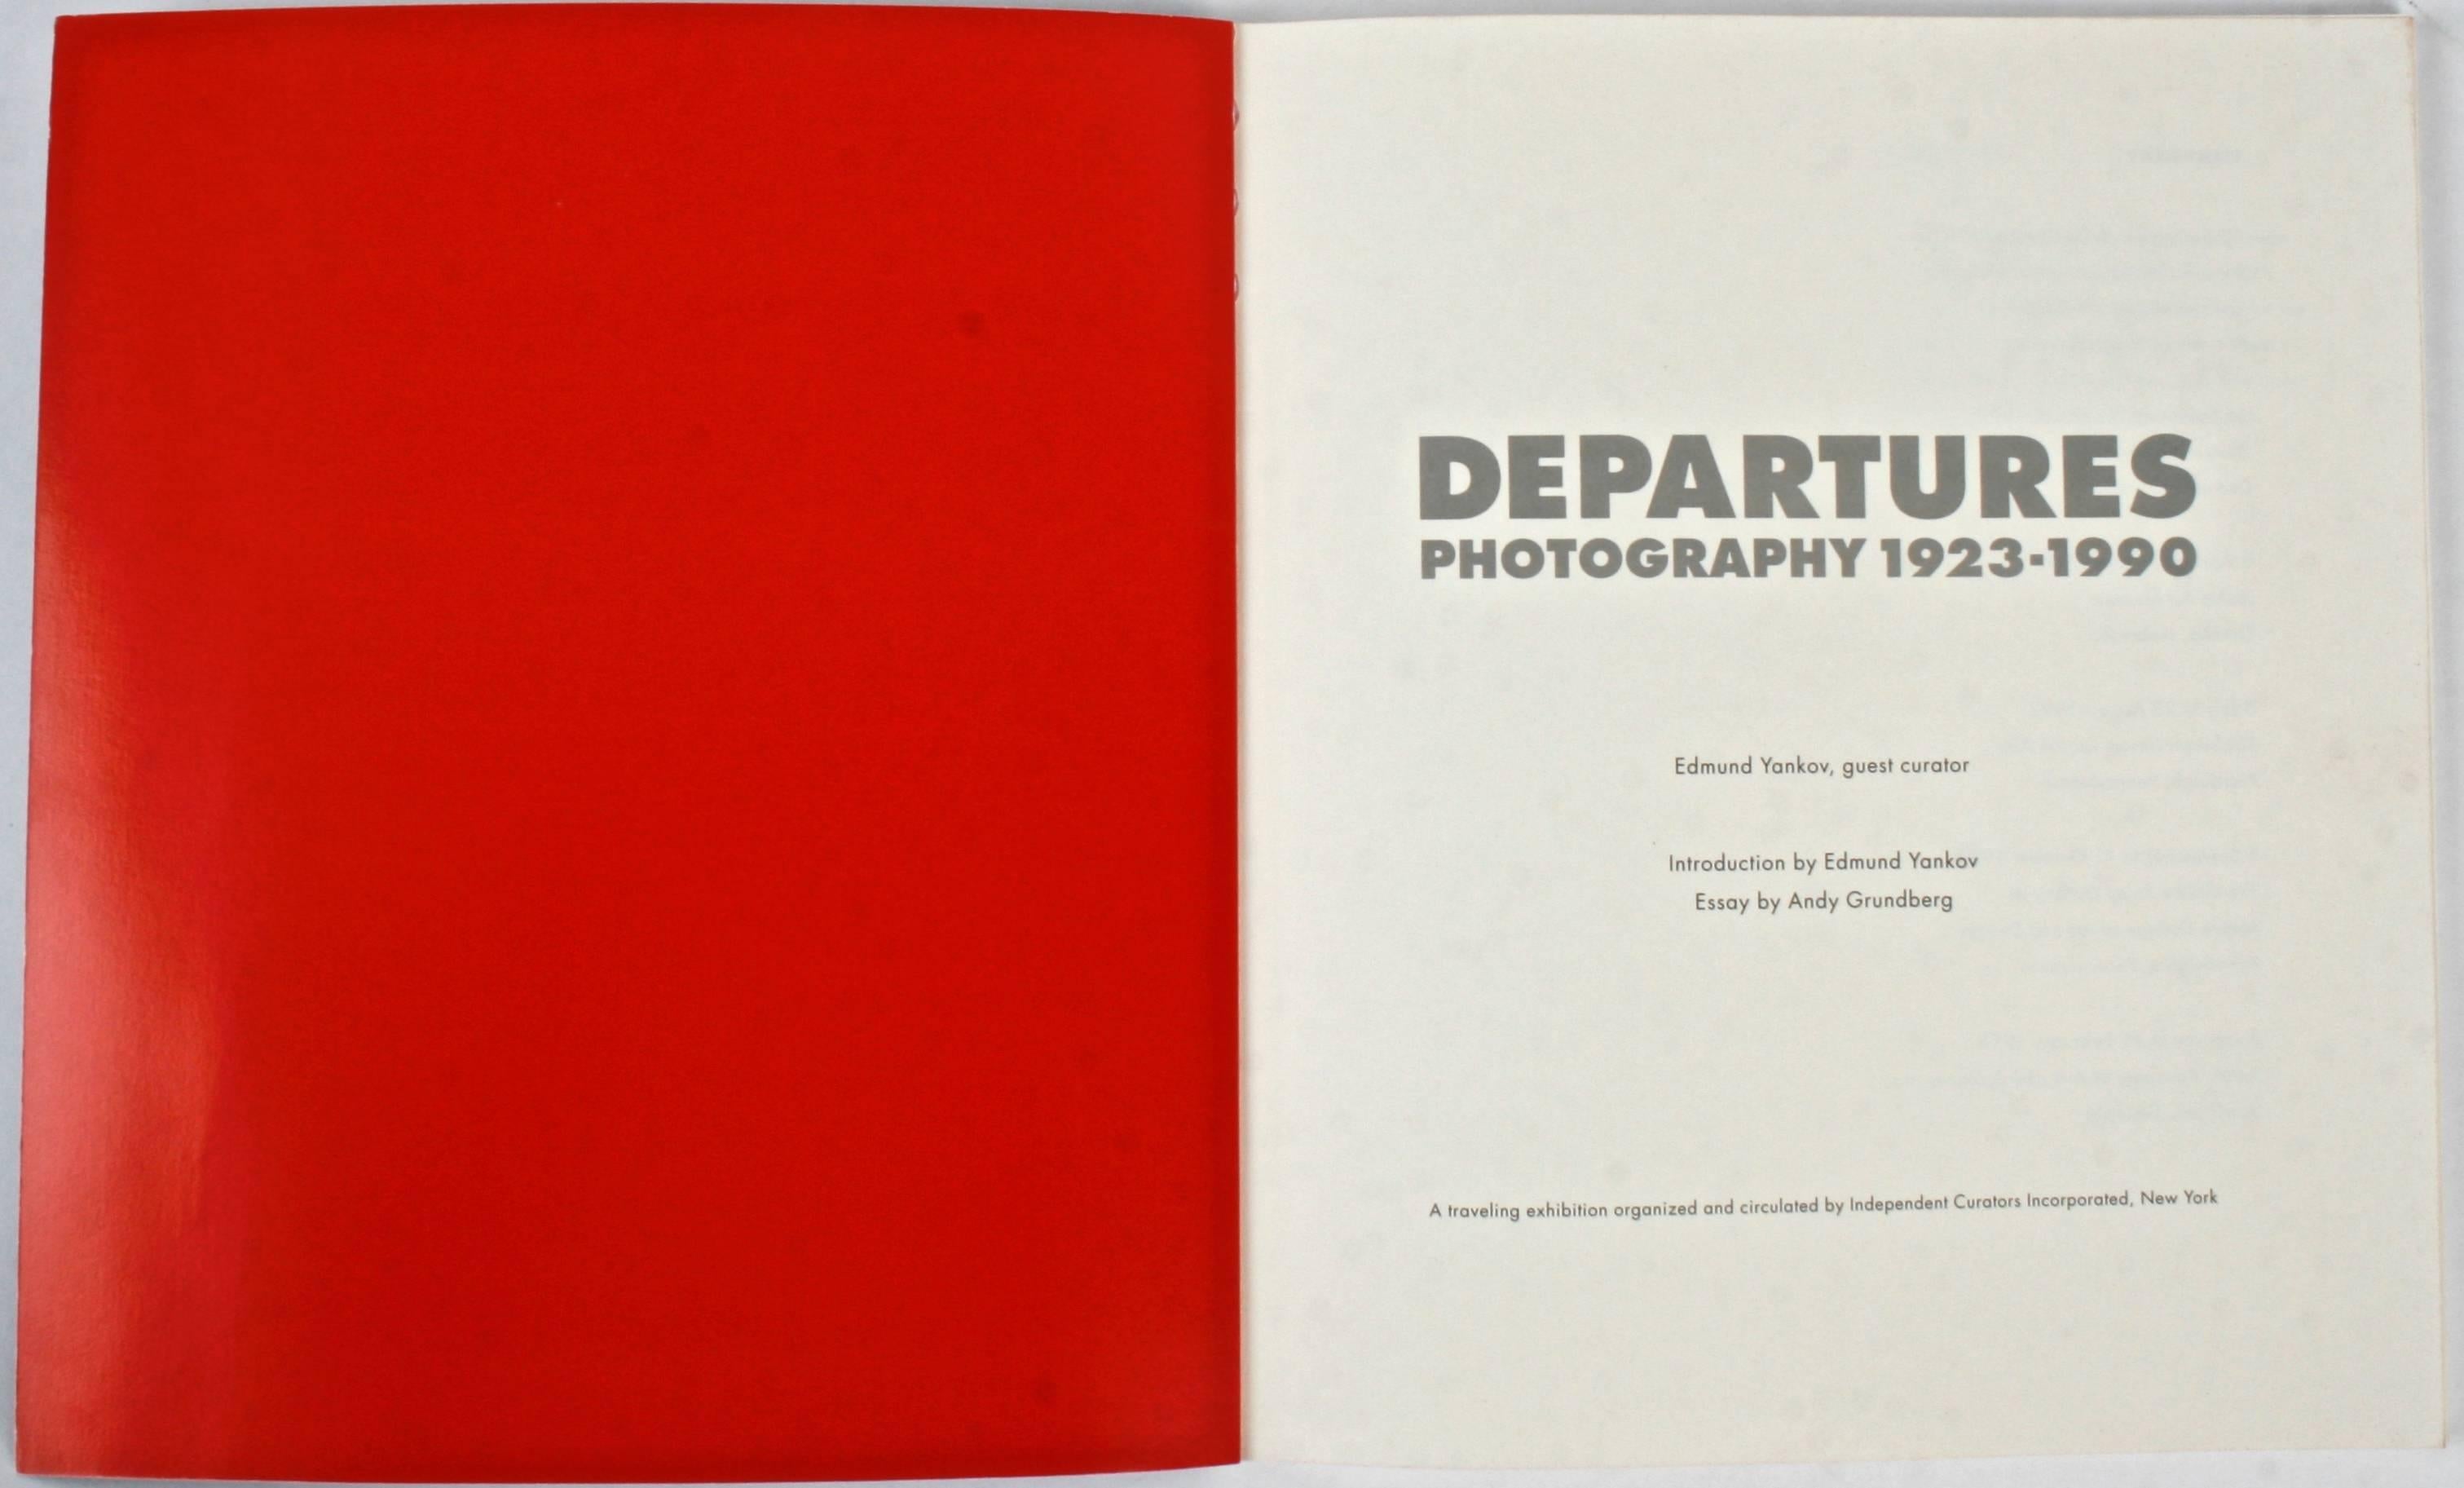 Departures Photography 1923-1990. New York: Independent Curators Incorporated, 1991. First edition soft cover. 72 pp. A catalogue produced for the traveling exhibition, by the same name, that toured Worchester, Denver, Omaha, Pittsburgh,